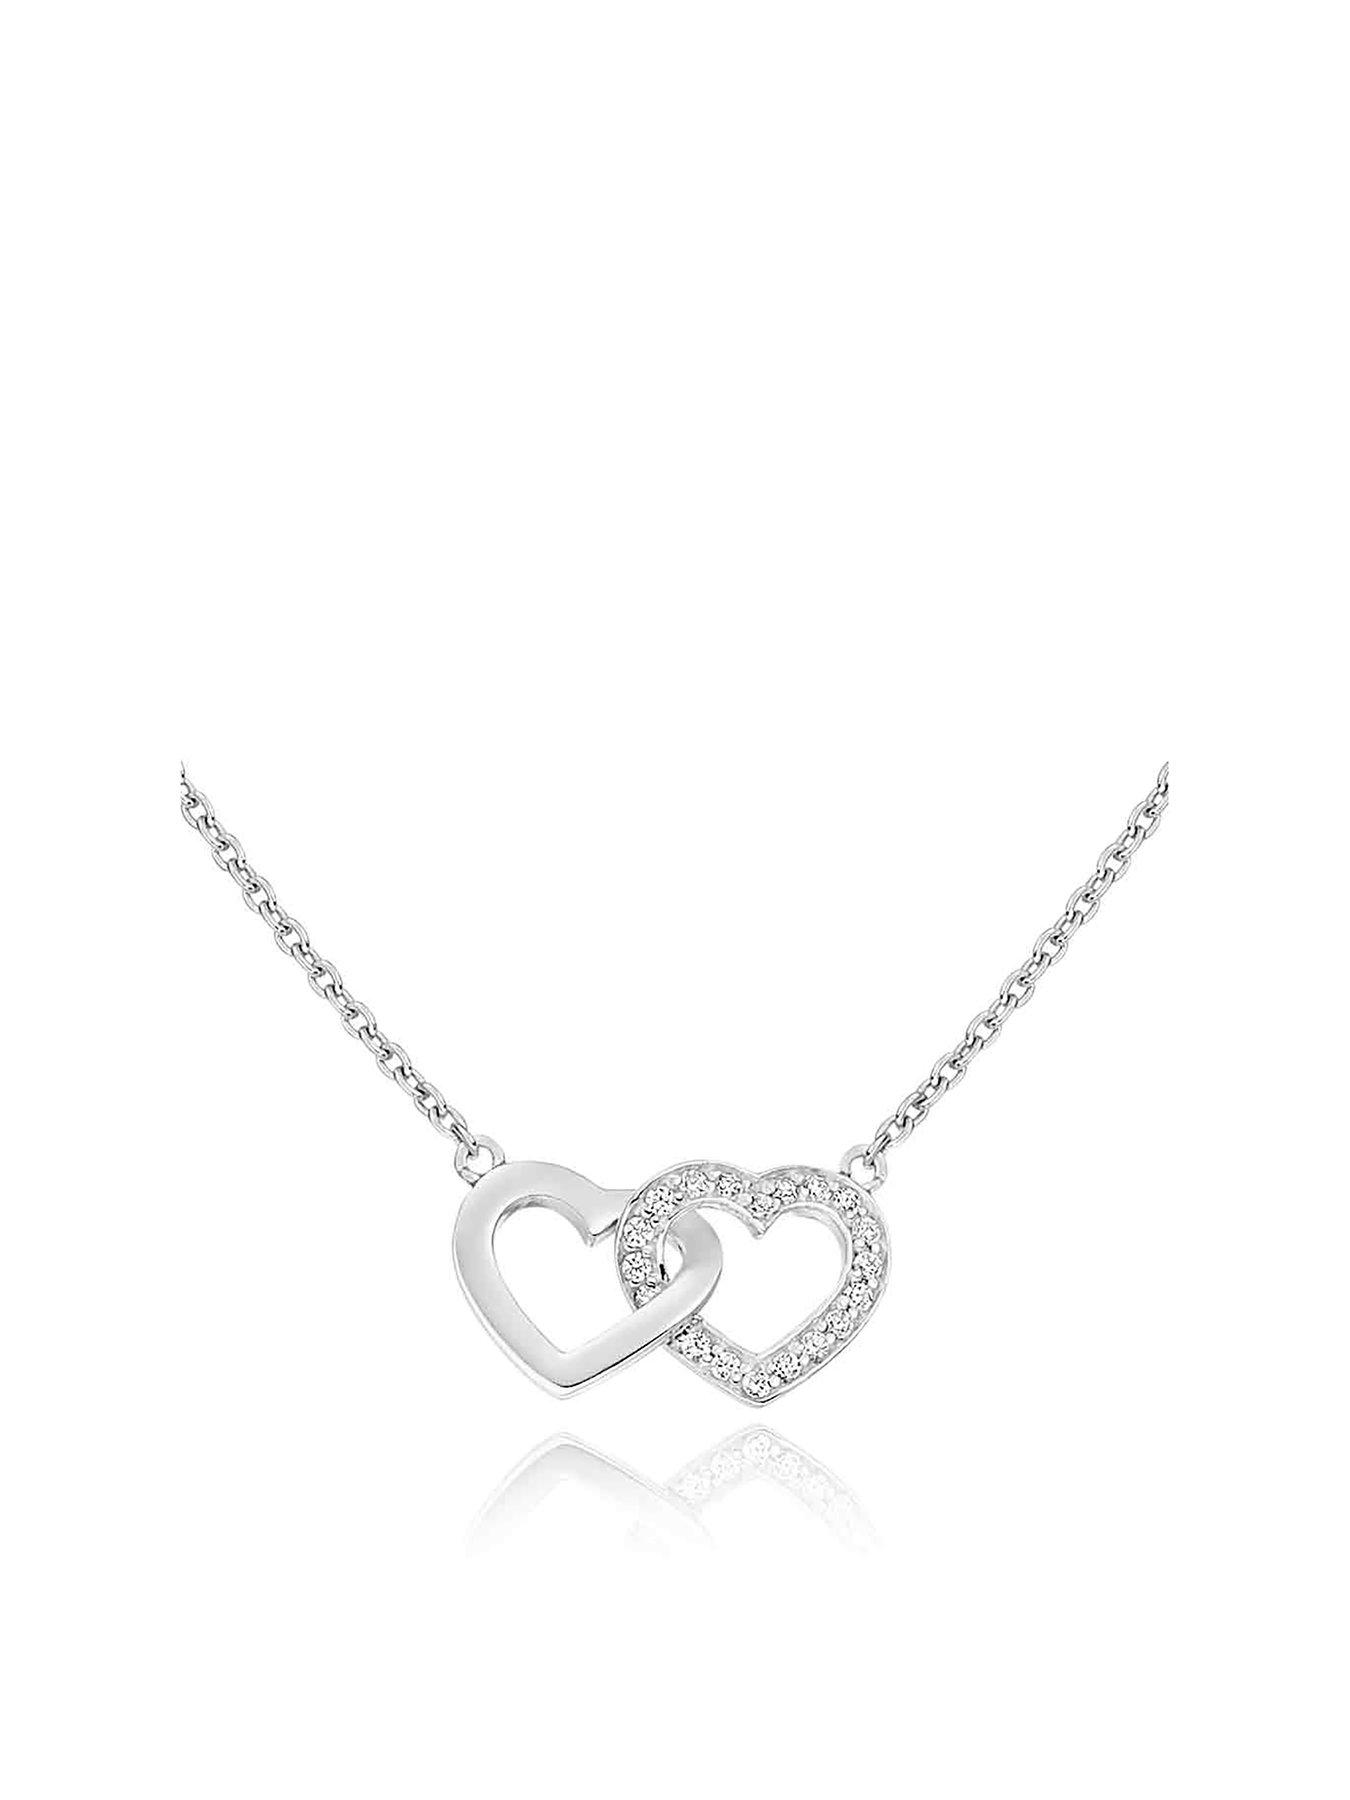 Silver Cubic Zirconia Double Heart Necklace